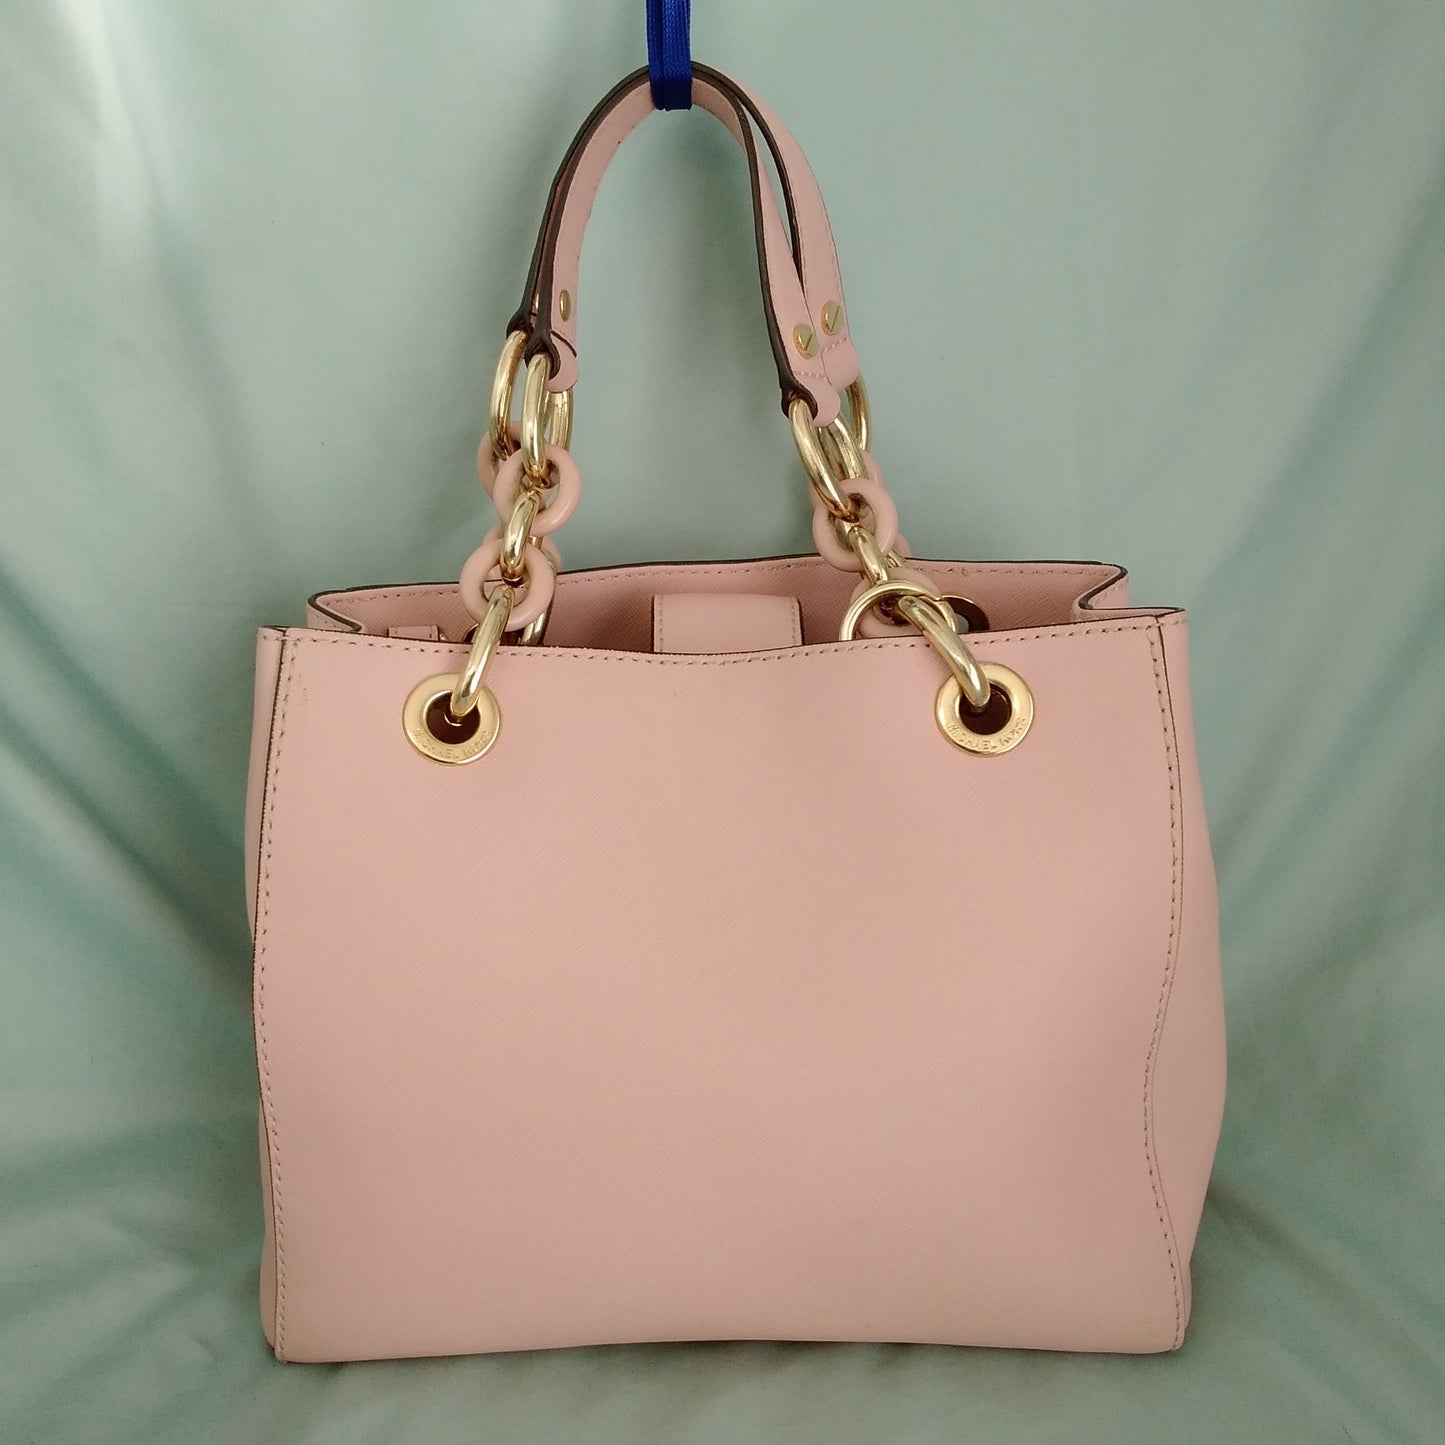 ON SALE* MICHAEL KORS #36063 Blush Pink Saffiano Leather Handbag with Strap  – ALL YOUR BLISS